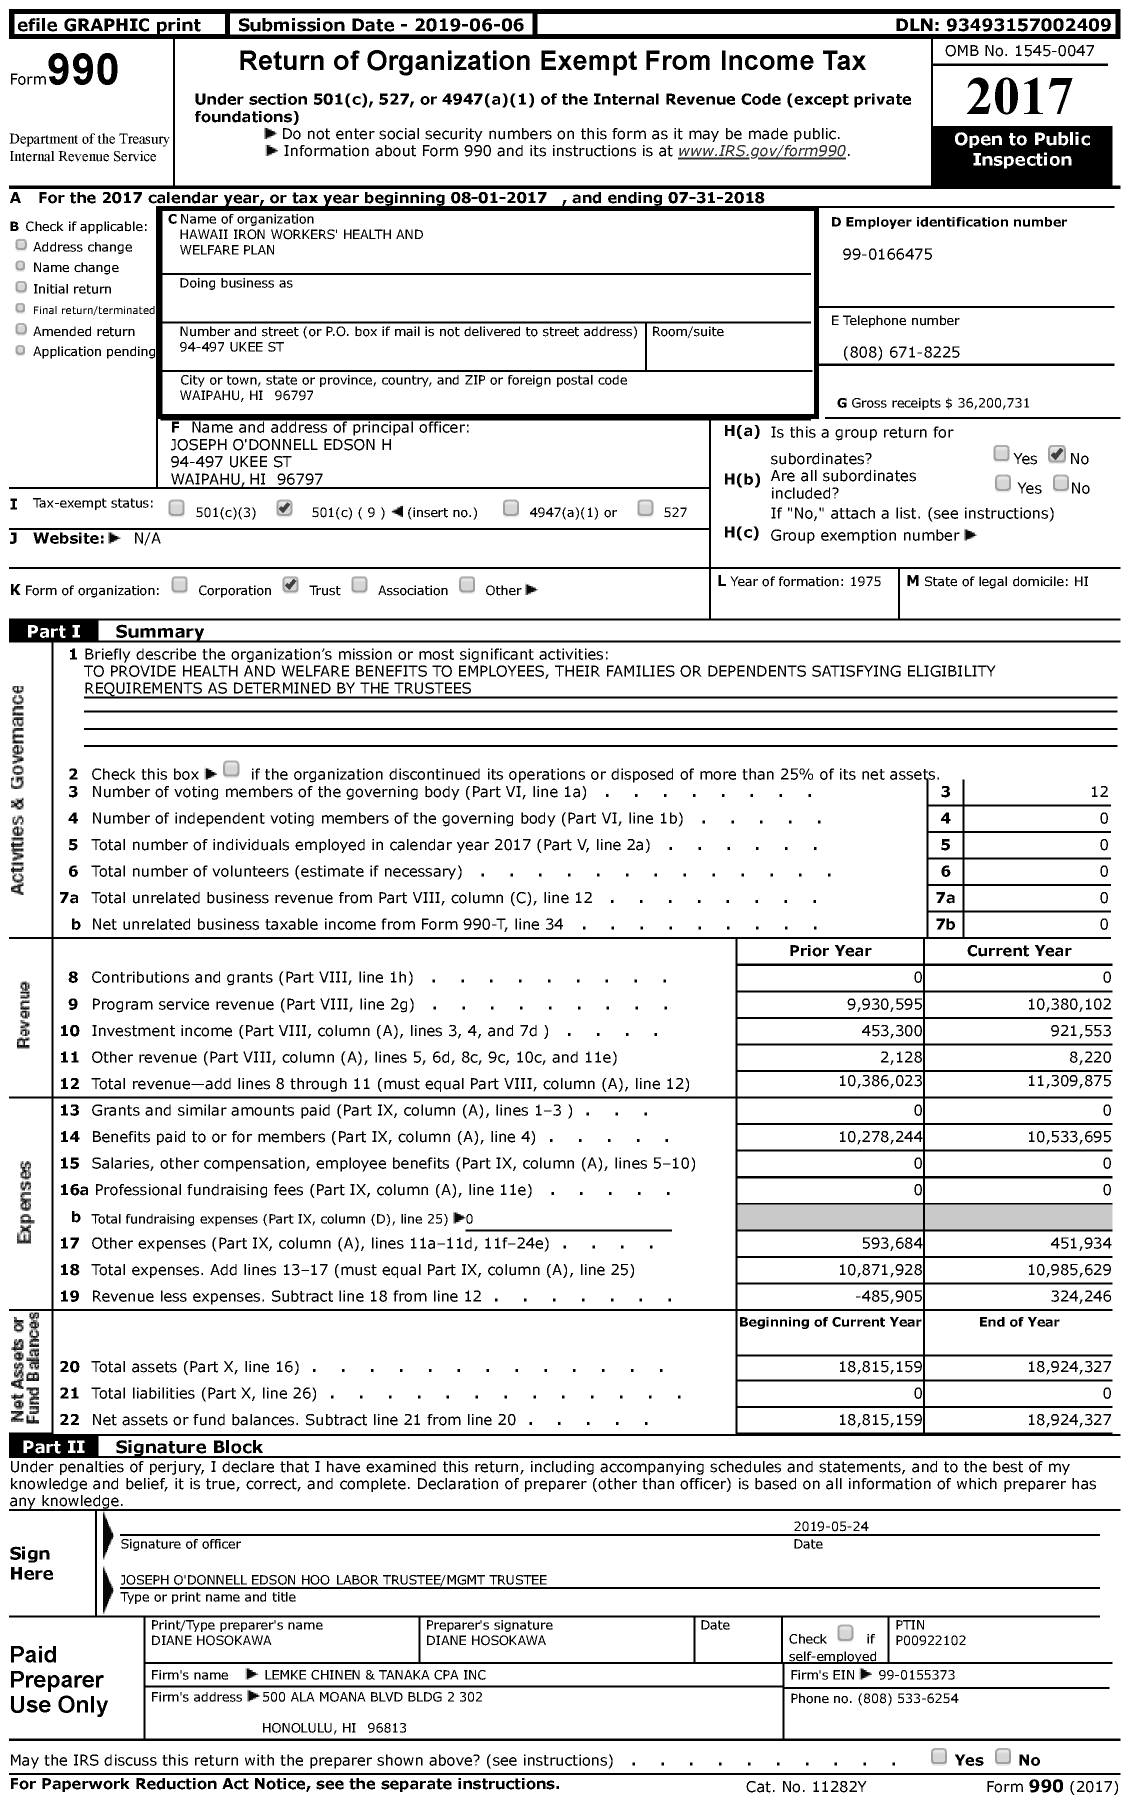 Image of first page of 2017 Form 990 for Hawaii Iron Workers' Health and Welfare Plan